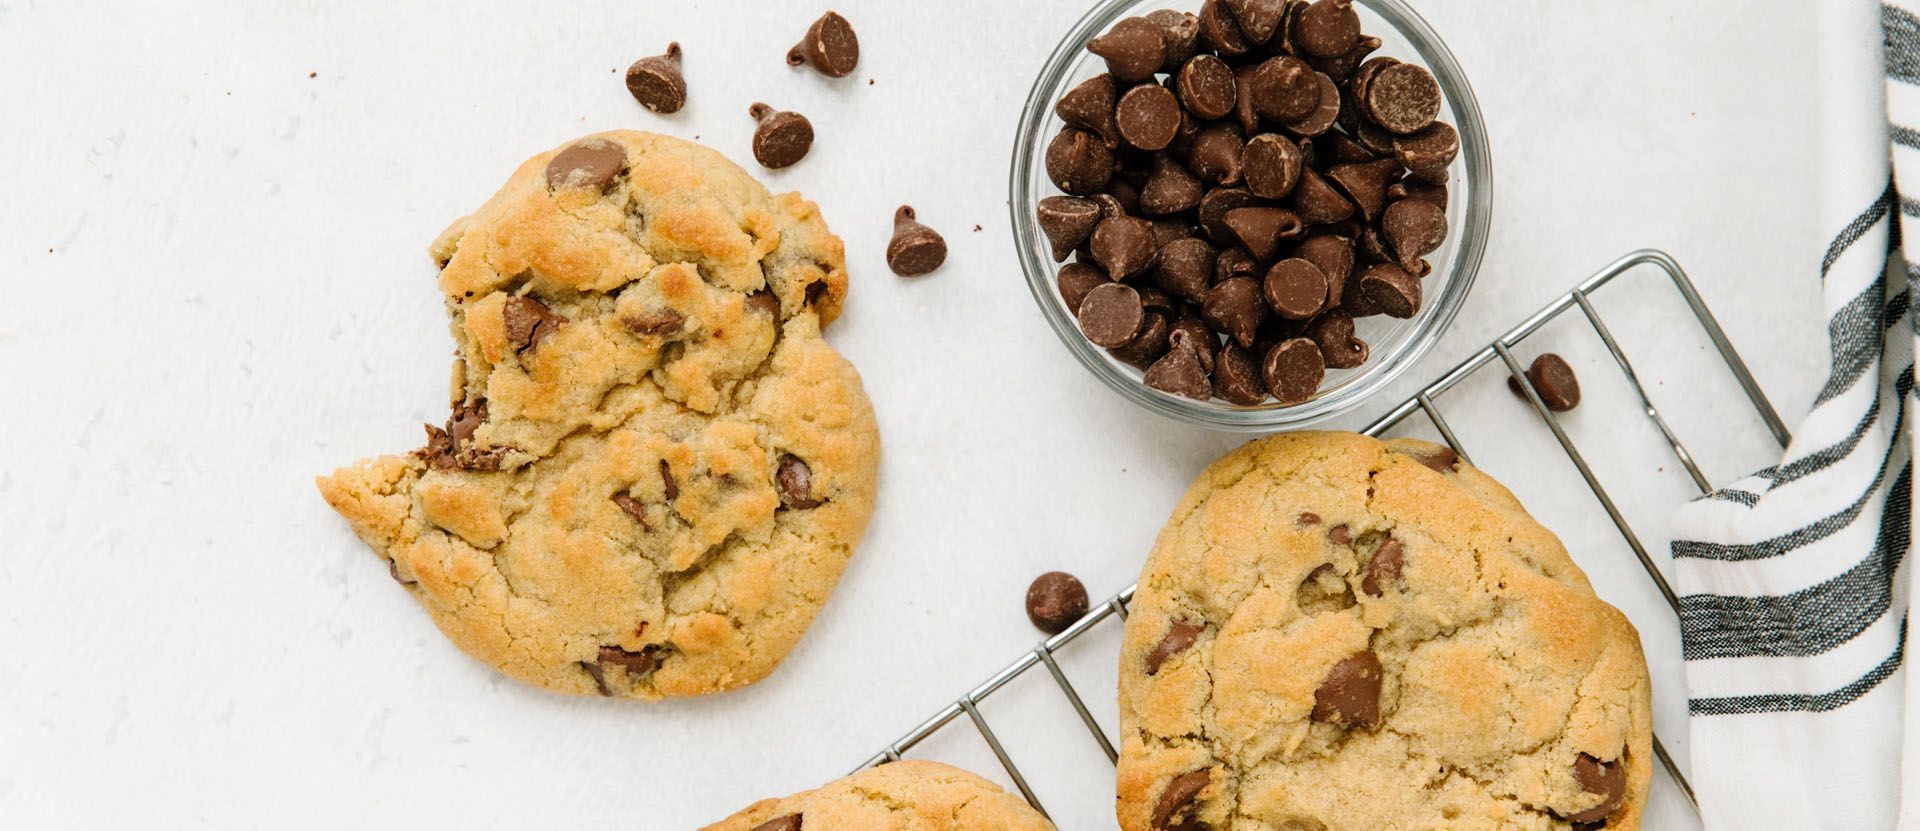 The best home made chocolate chip cookie recipe